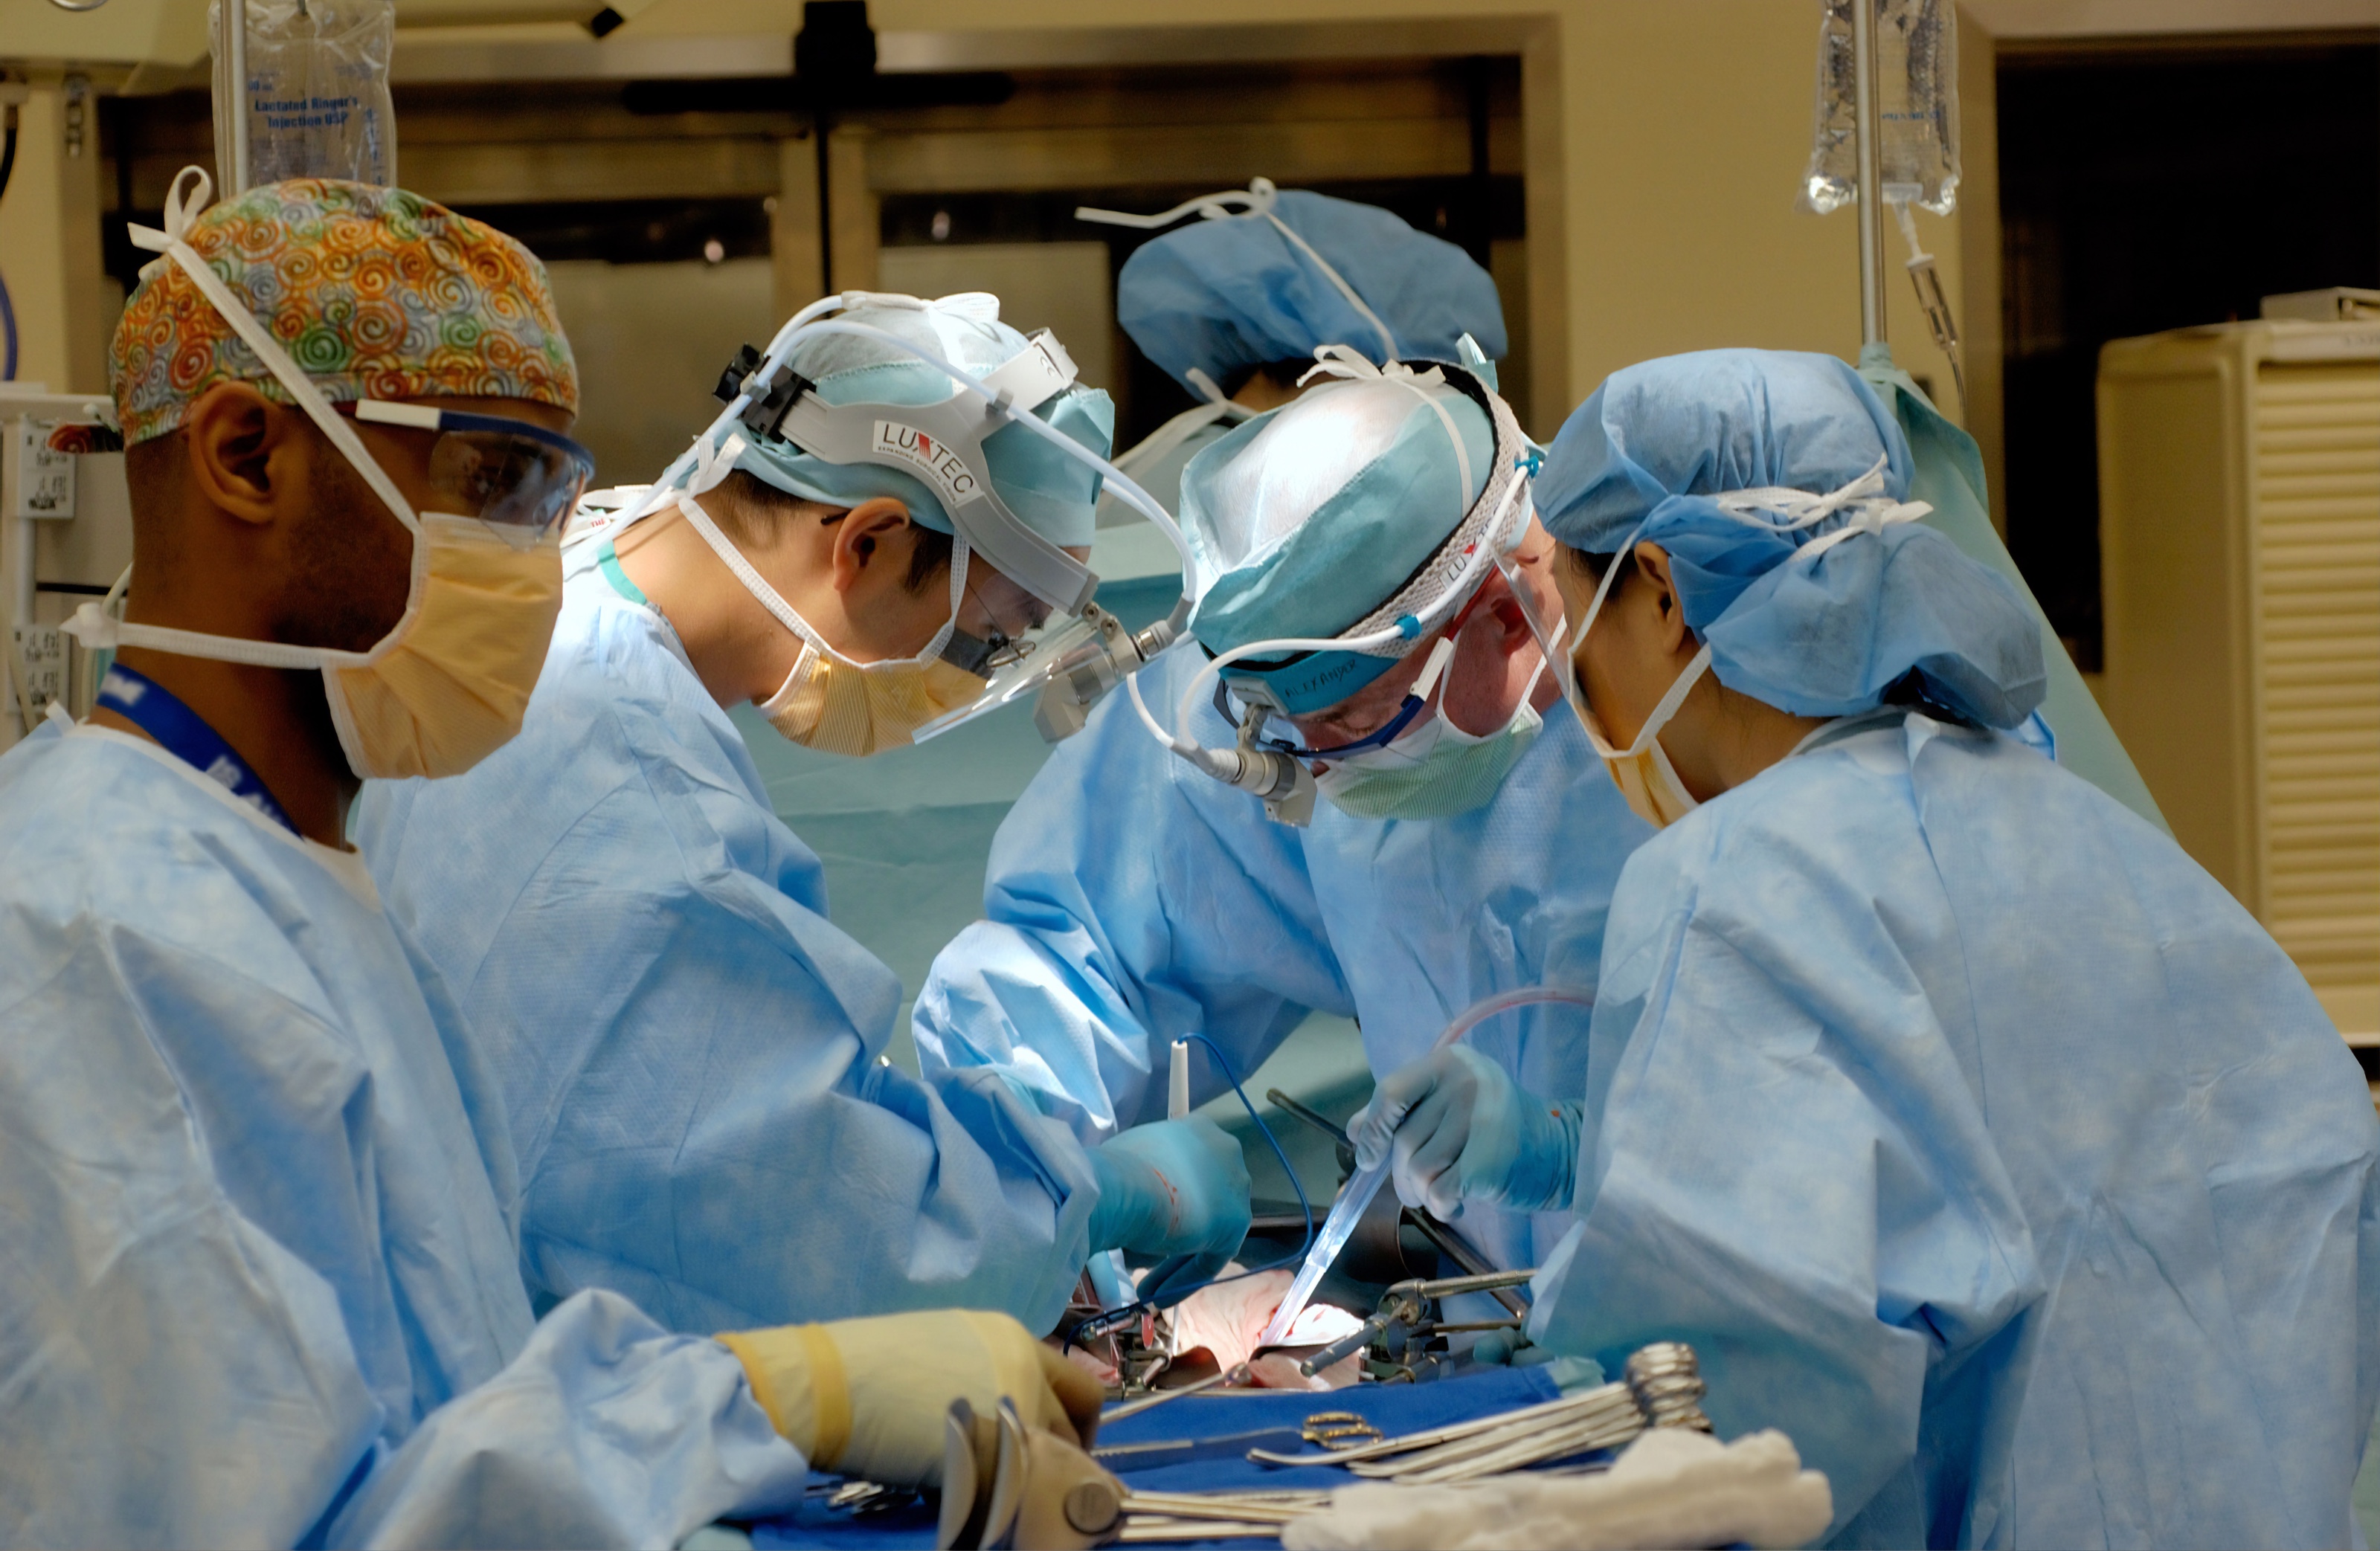 Five surgeons in scrubs working on a patient